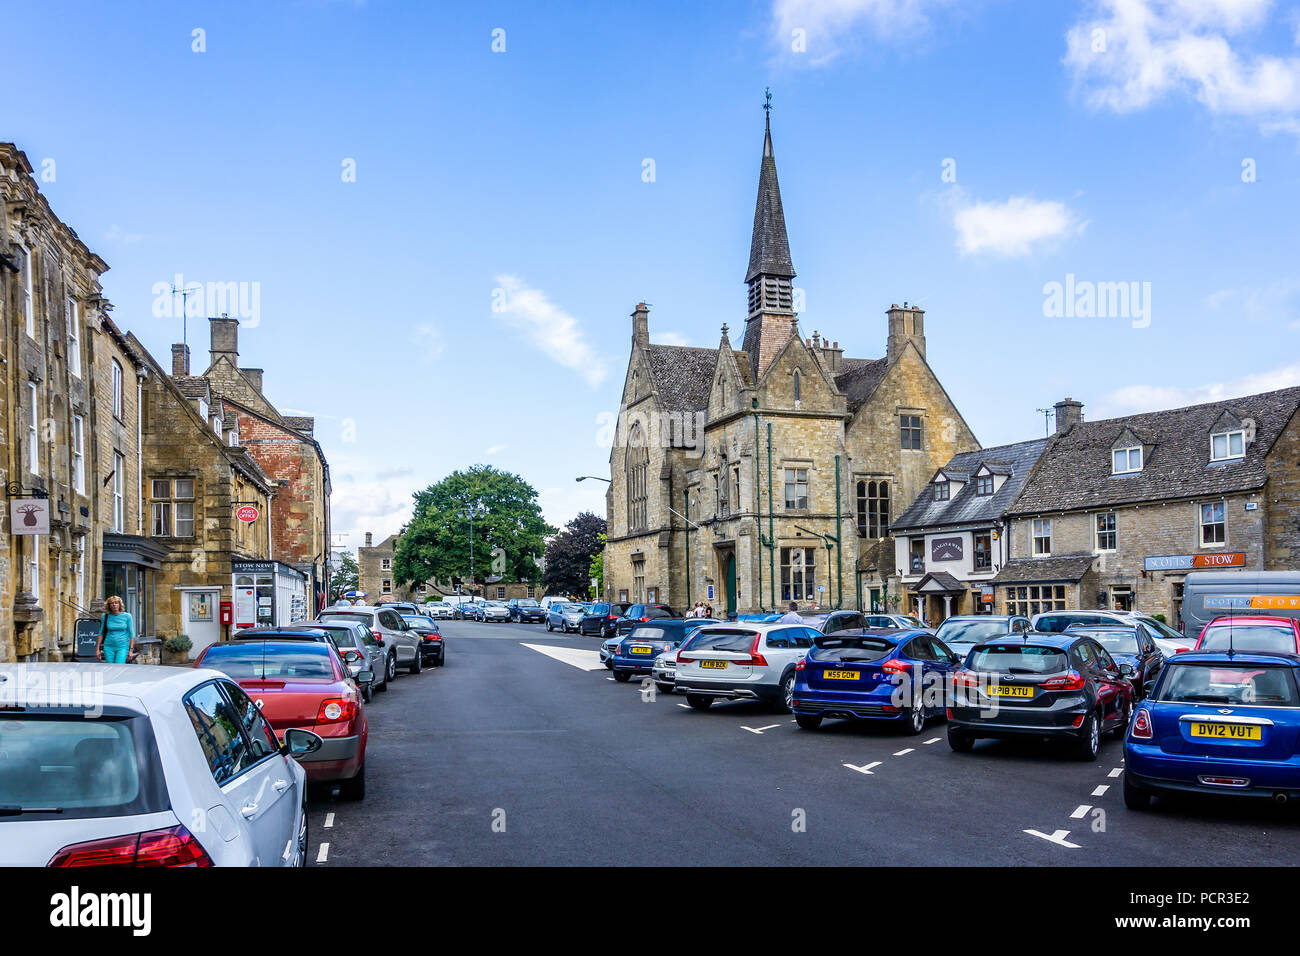 Streets and shops in historic cotswold town of Stow on the Wold in Gloucestershire, UK on 3 August 2018 Stock Photo